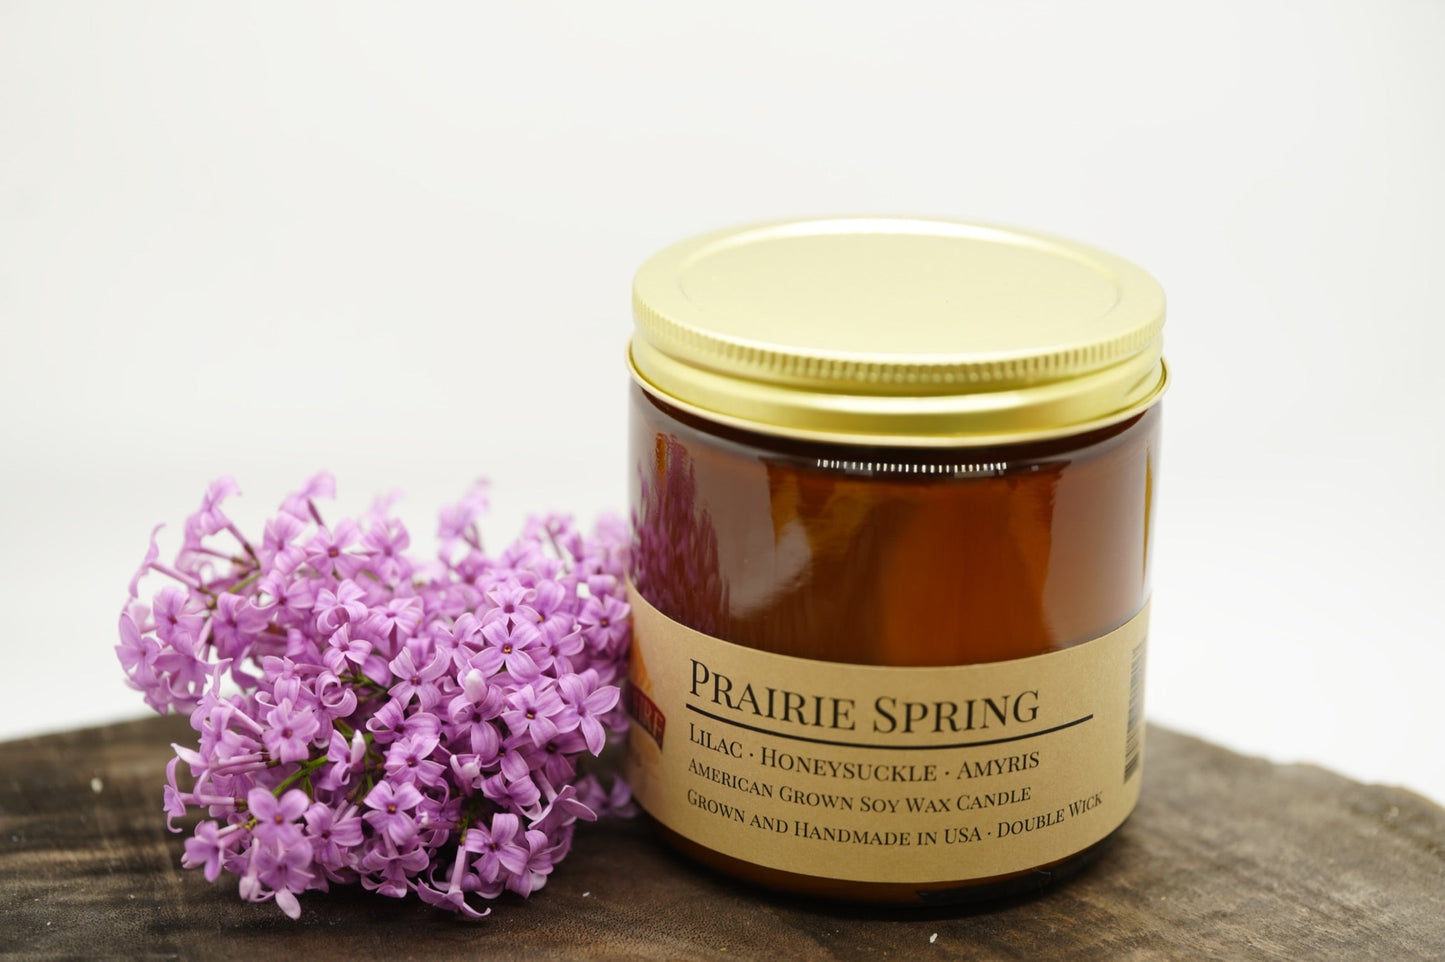 Prairie Spring Soy Candle | 16 oz Double Wick Amber Apothecary Jar